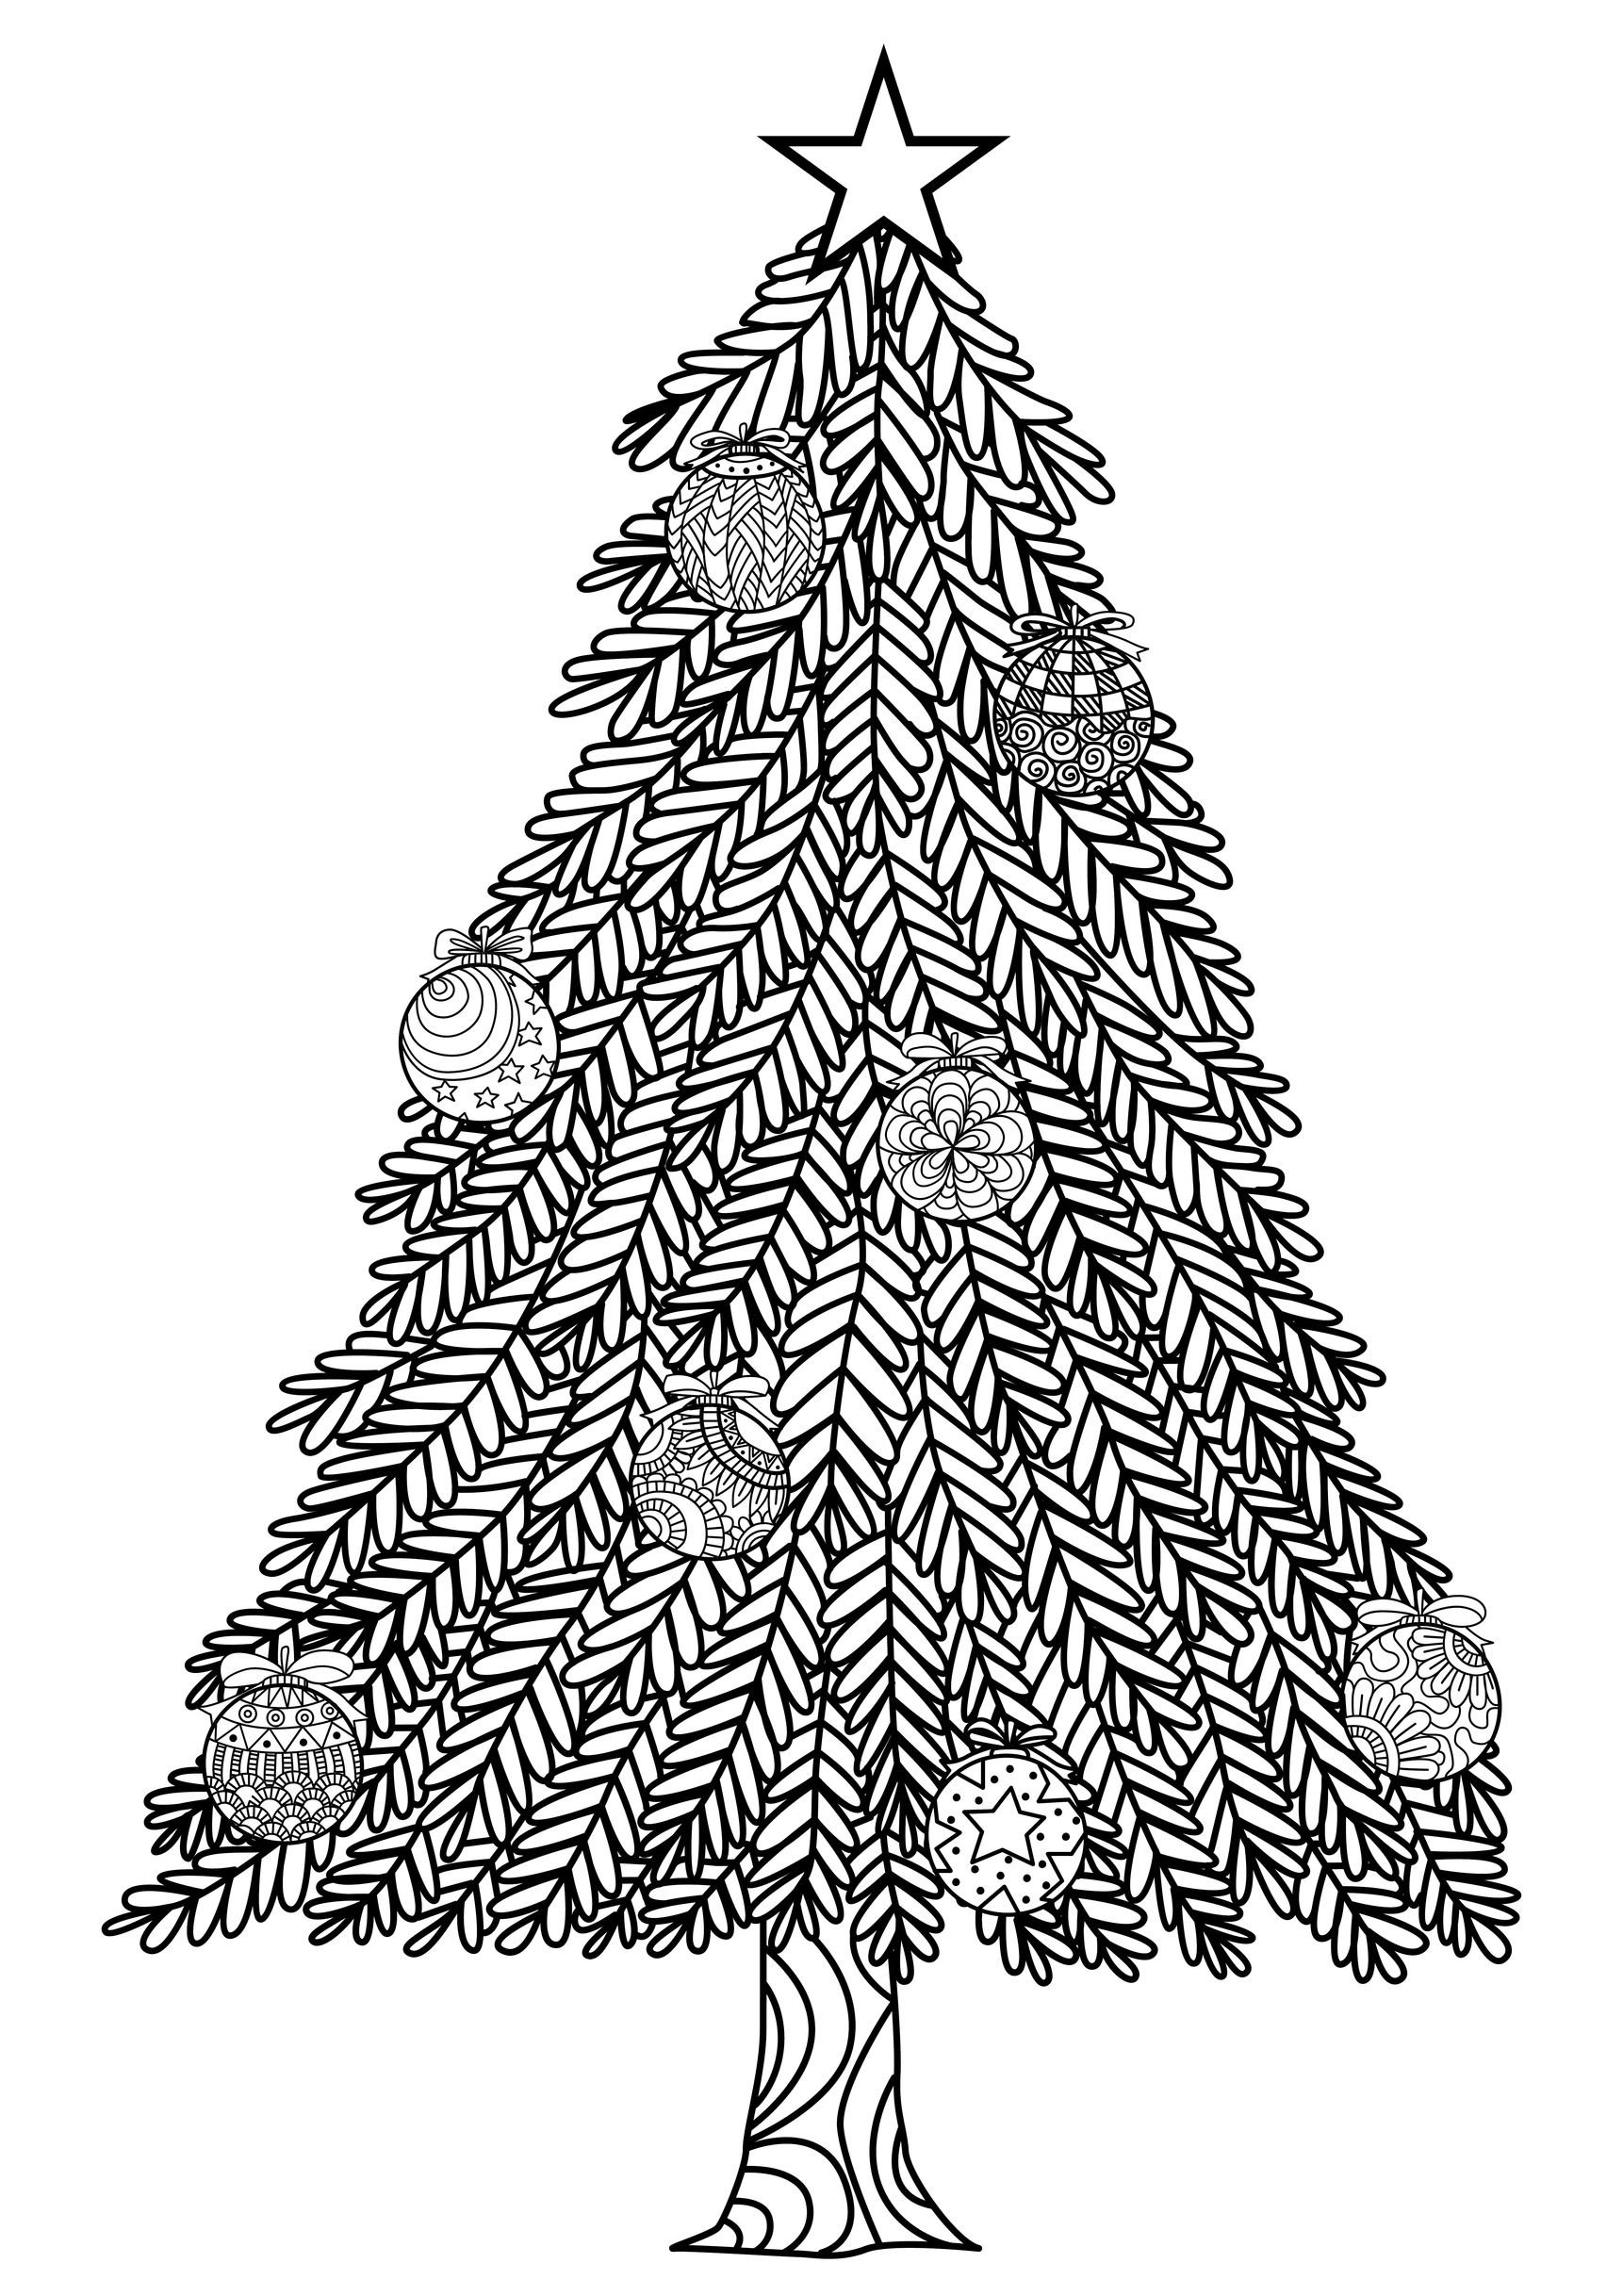 Christmas Tree With Ball Ornaments - Christmas Adult Coloring Pages - Free Printable Christmas Tree Ornaments To Color